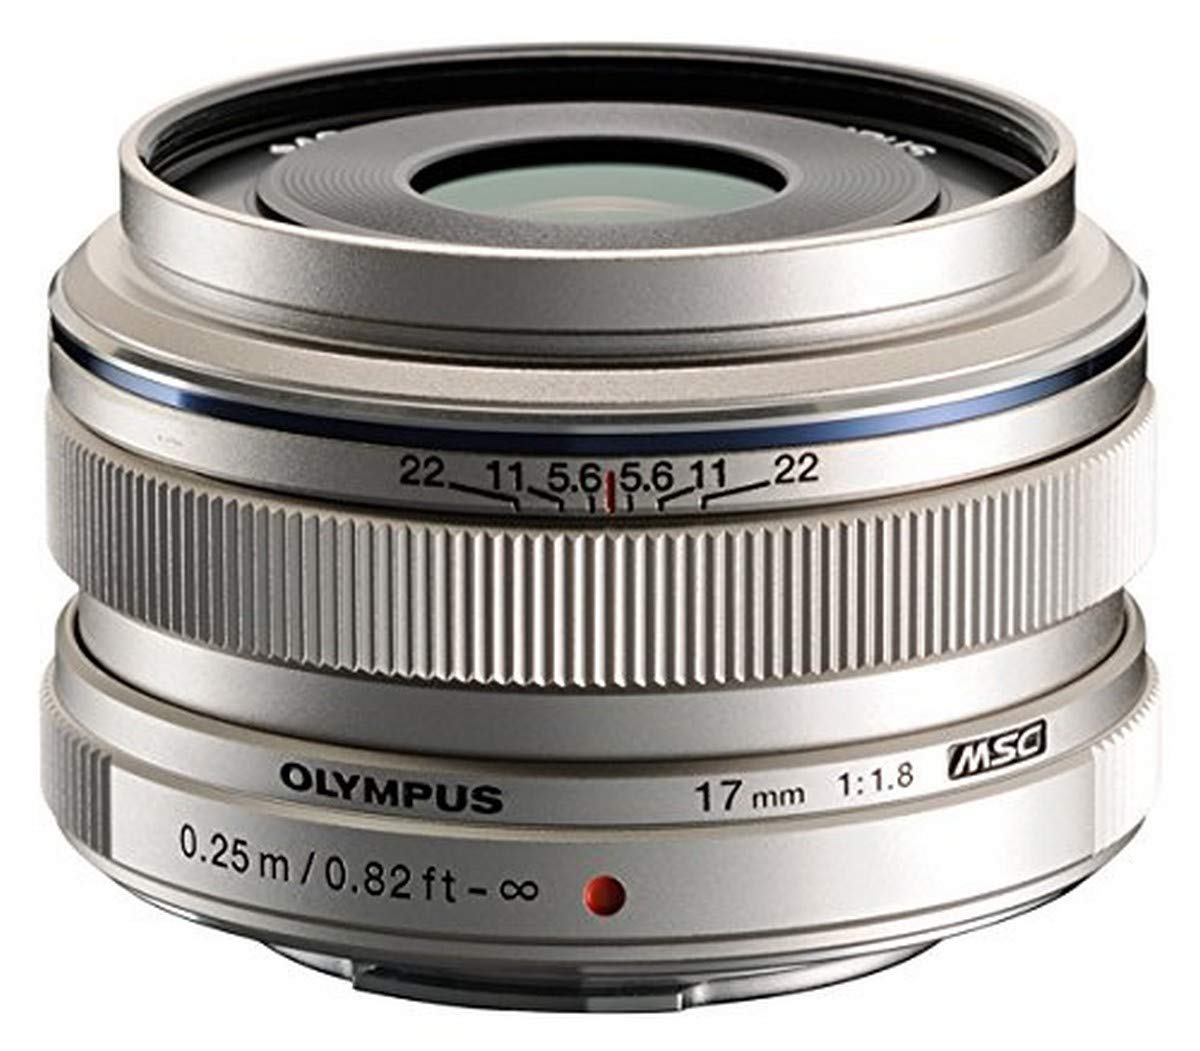 OM SYSTEM OLYMPUS M.Zuiko Digital 17mm F1.8 Silver For Micro Four Thirds System Camera, Compact Design, Beautiful Bokeh, Bright